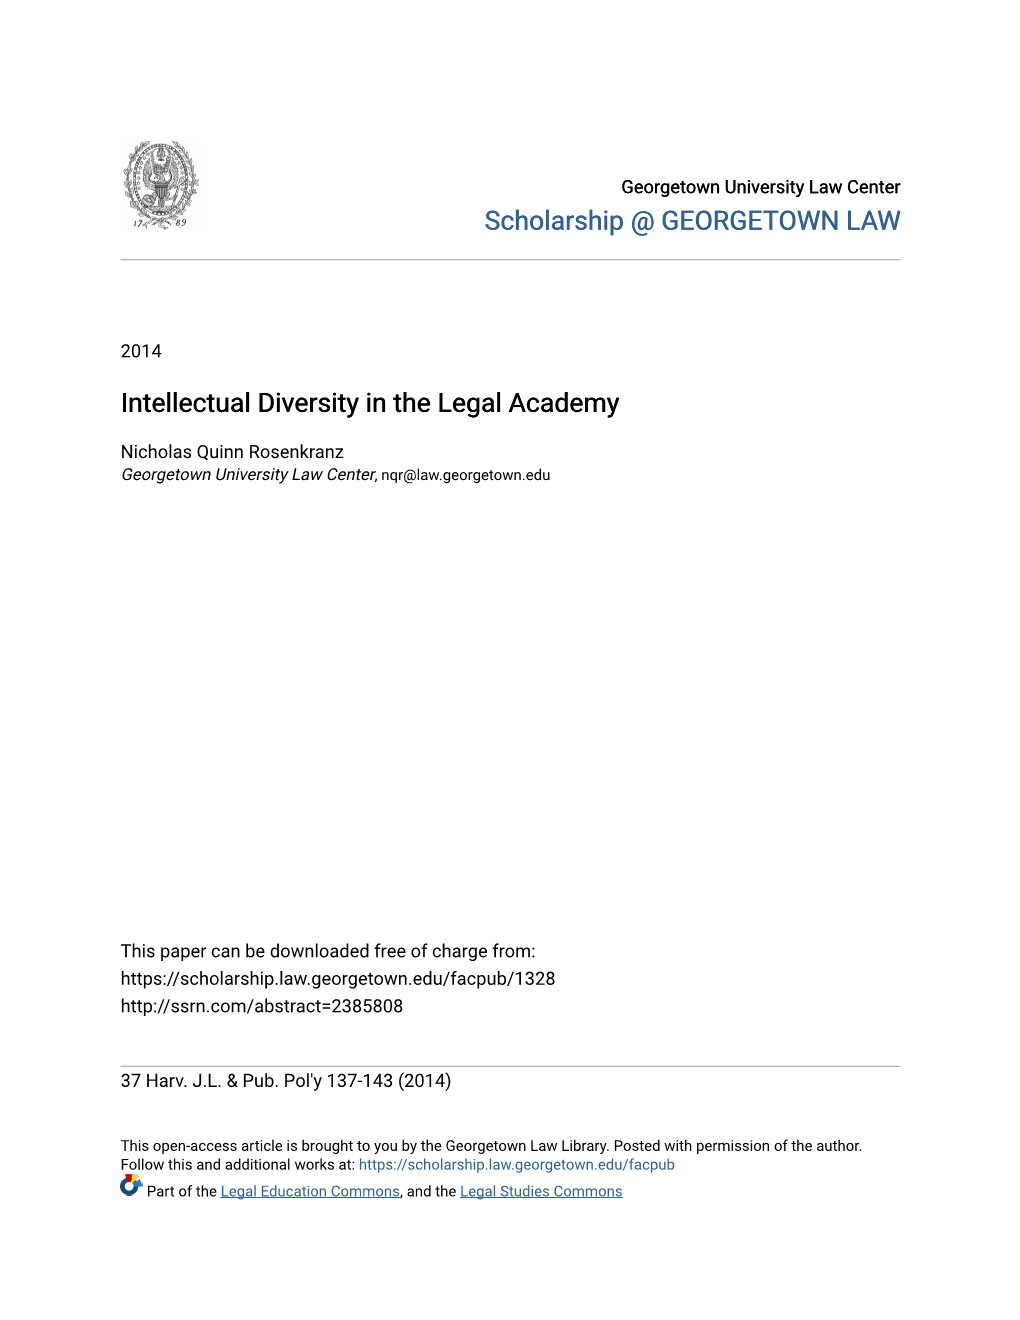 Intellectual Diversity in the Legal Academy